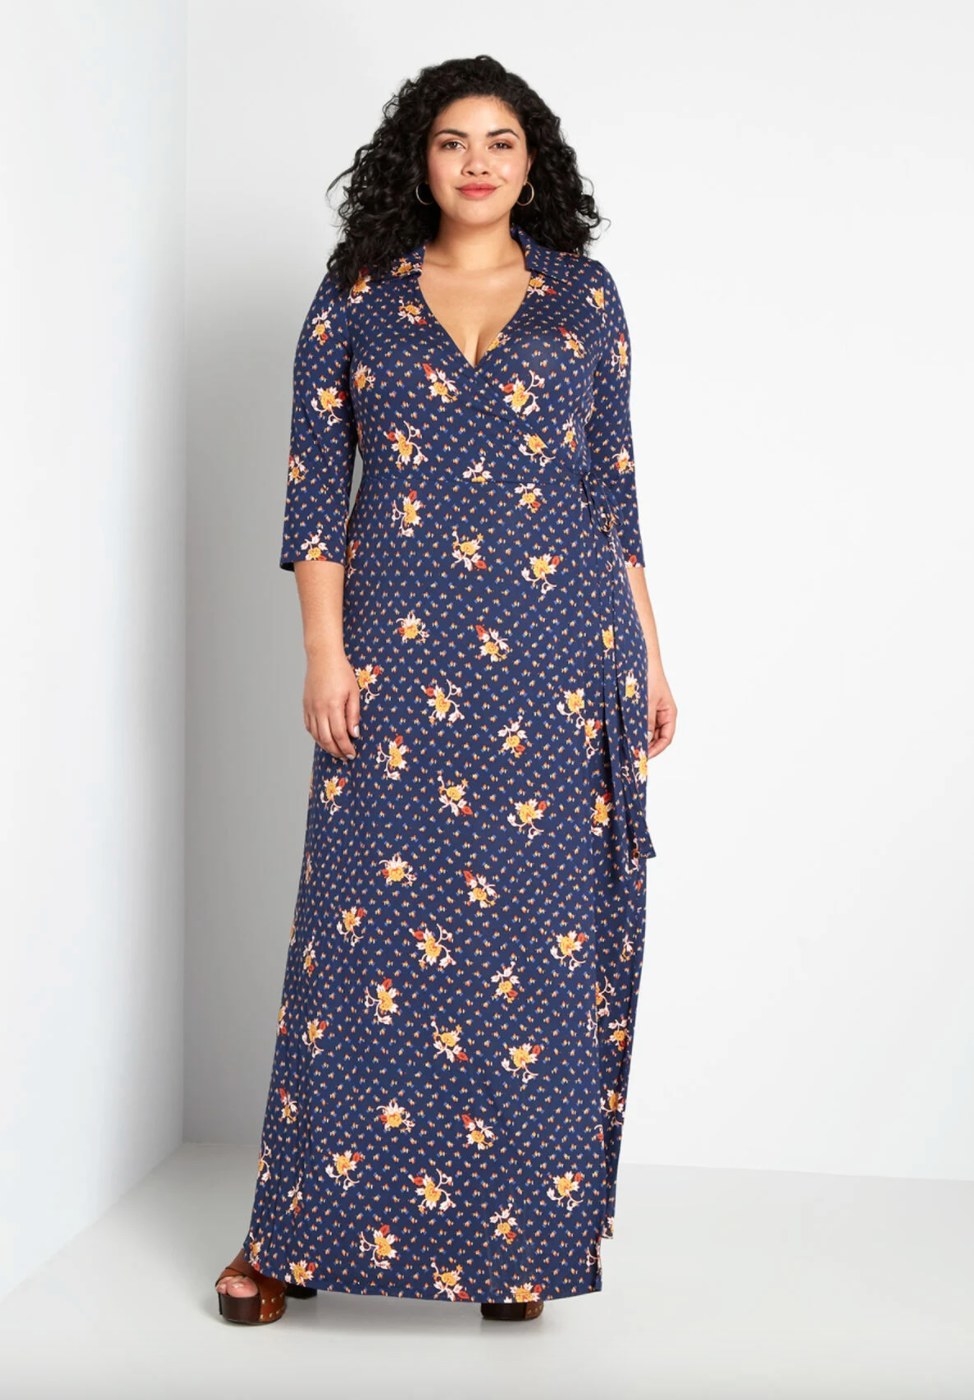 The long wrap dress in navy geo/floral being worn by a model